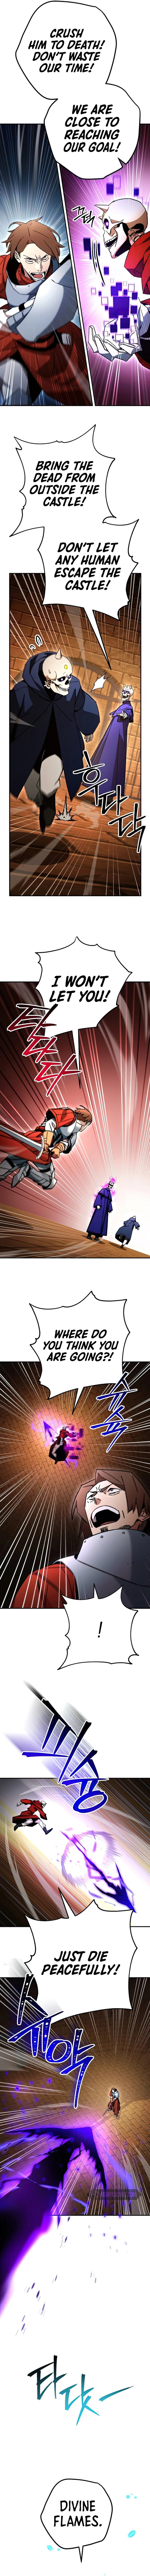 The Hero Returns - Chapter 33 Page 9